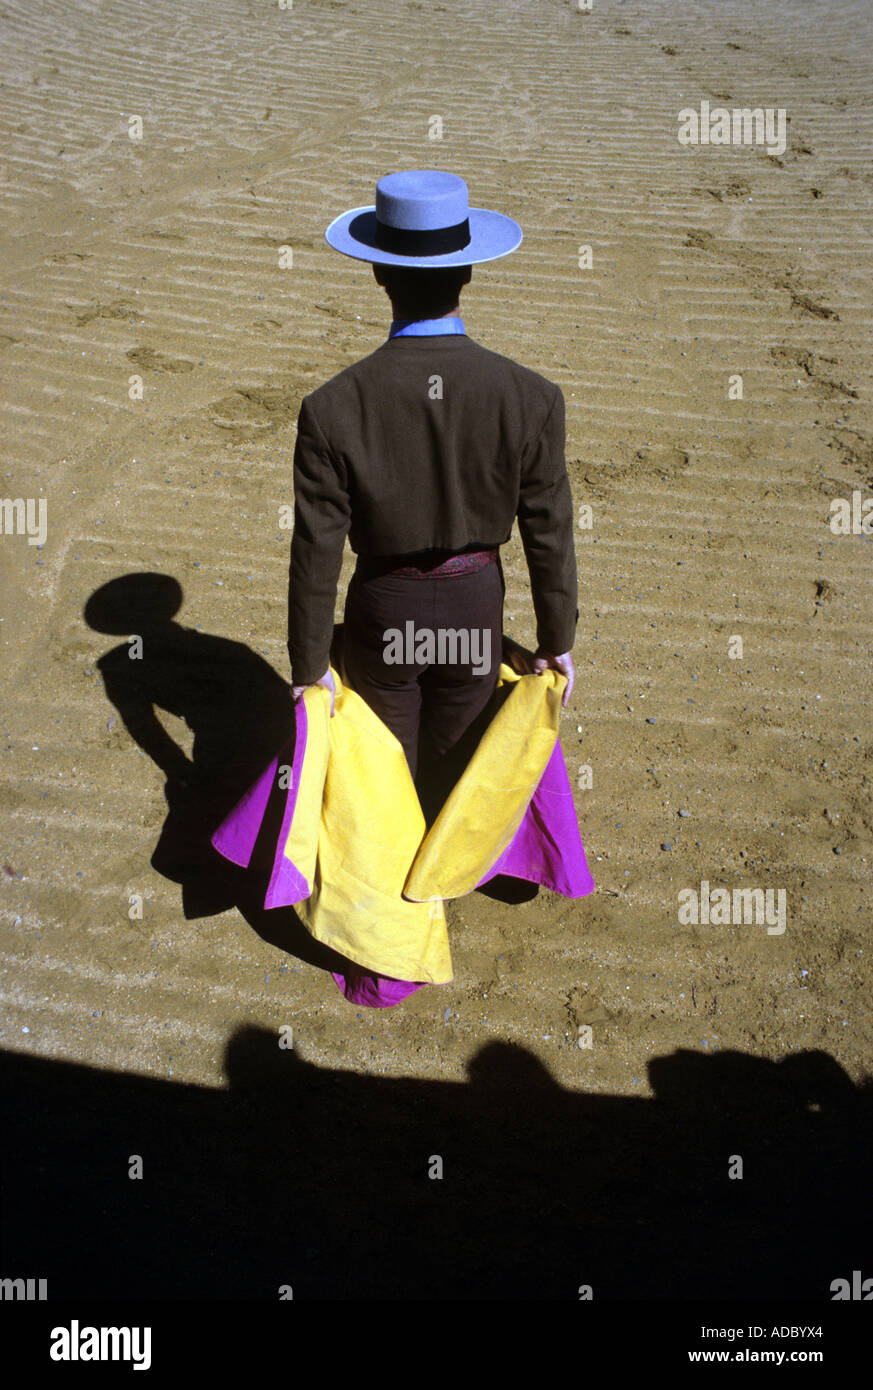 Shadow of  bull fighter/ matador carrying cloak of yellow and purple, Spain Stock Photo